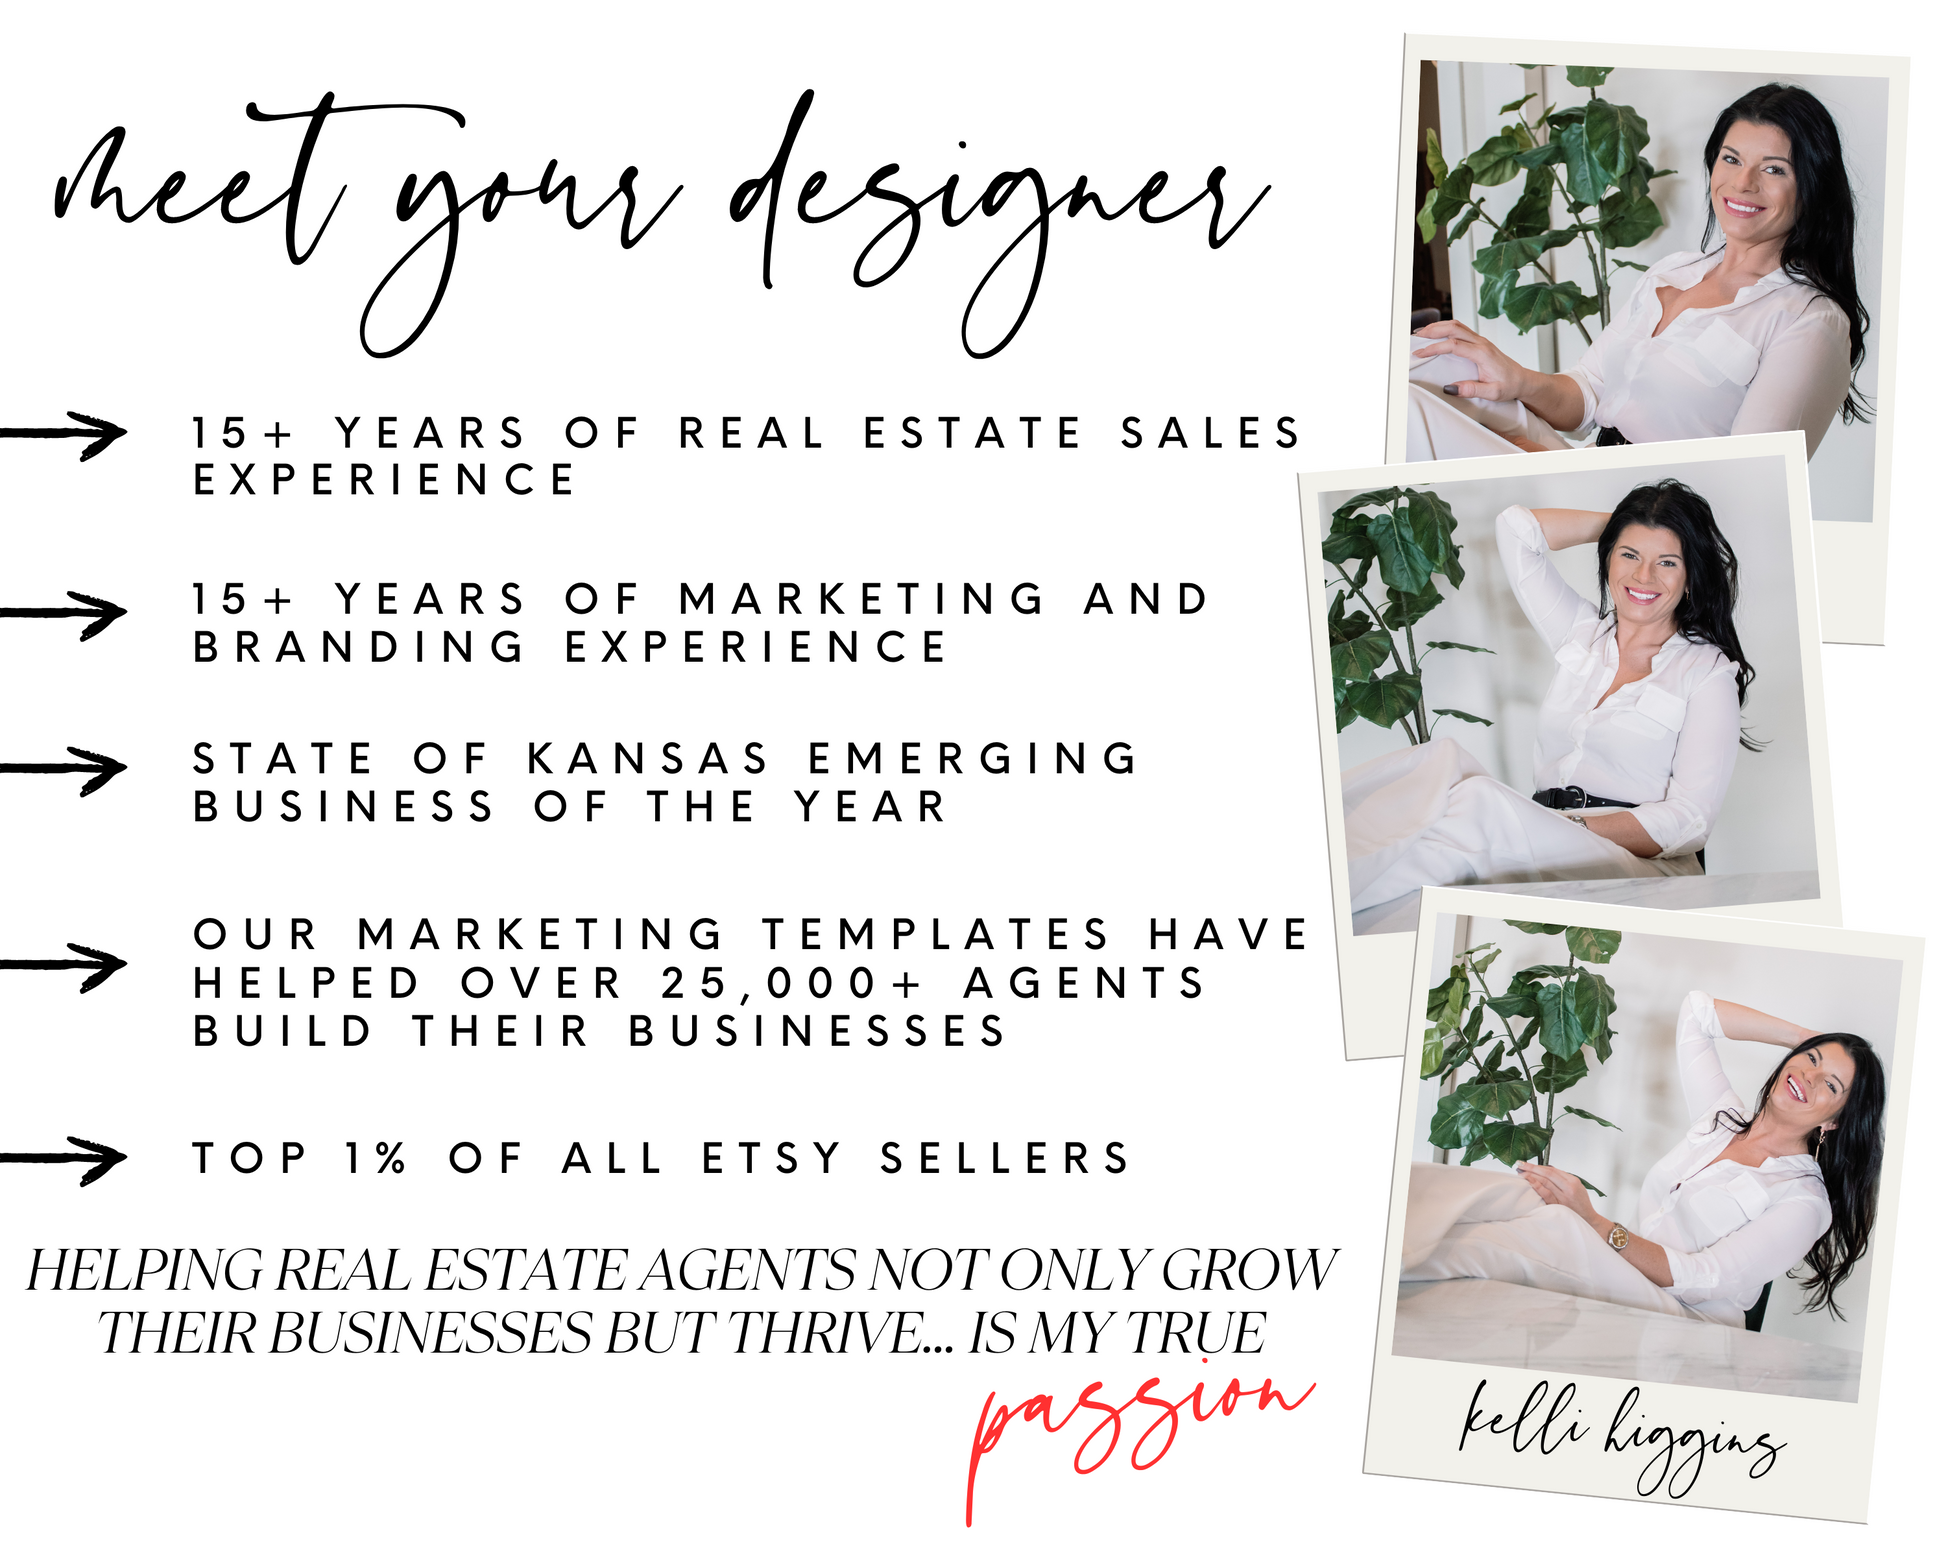 Hello, I am Kelli. The owner of Elevated Agent and your Real Estate Templates designer helping you elevate your real estate business.